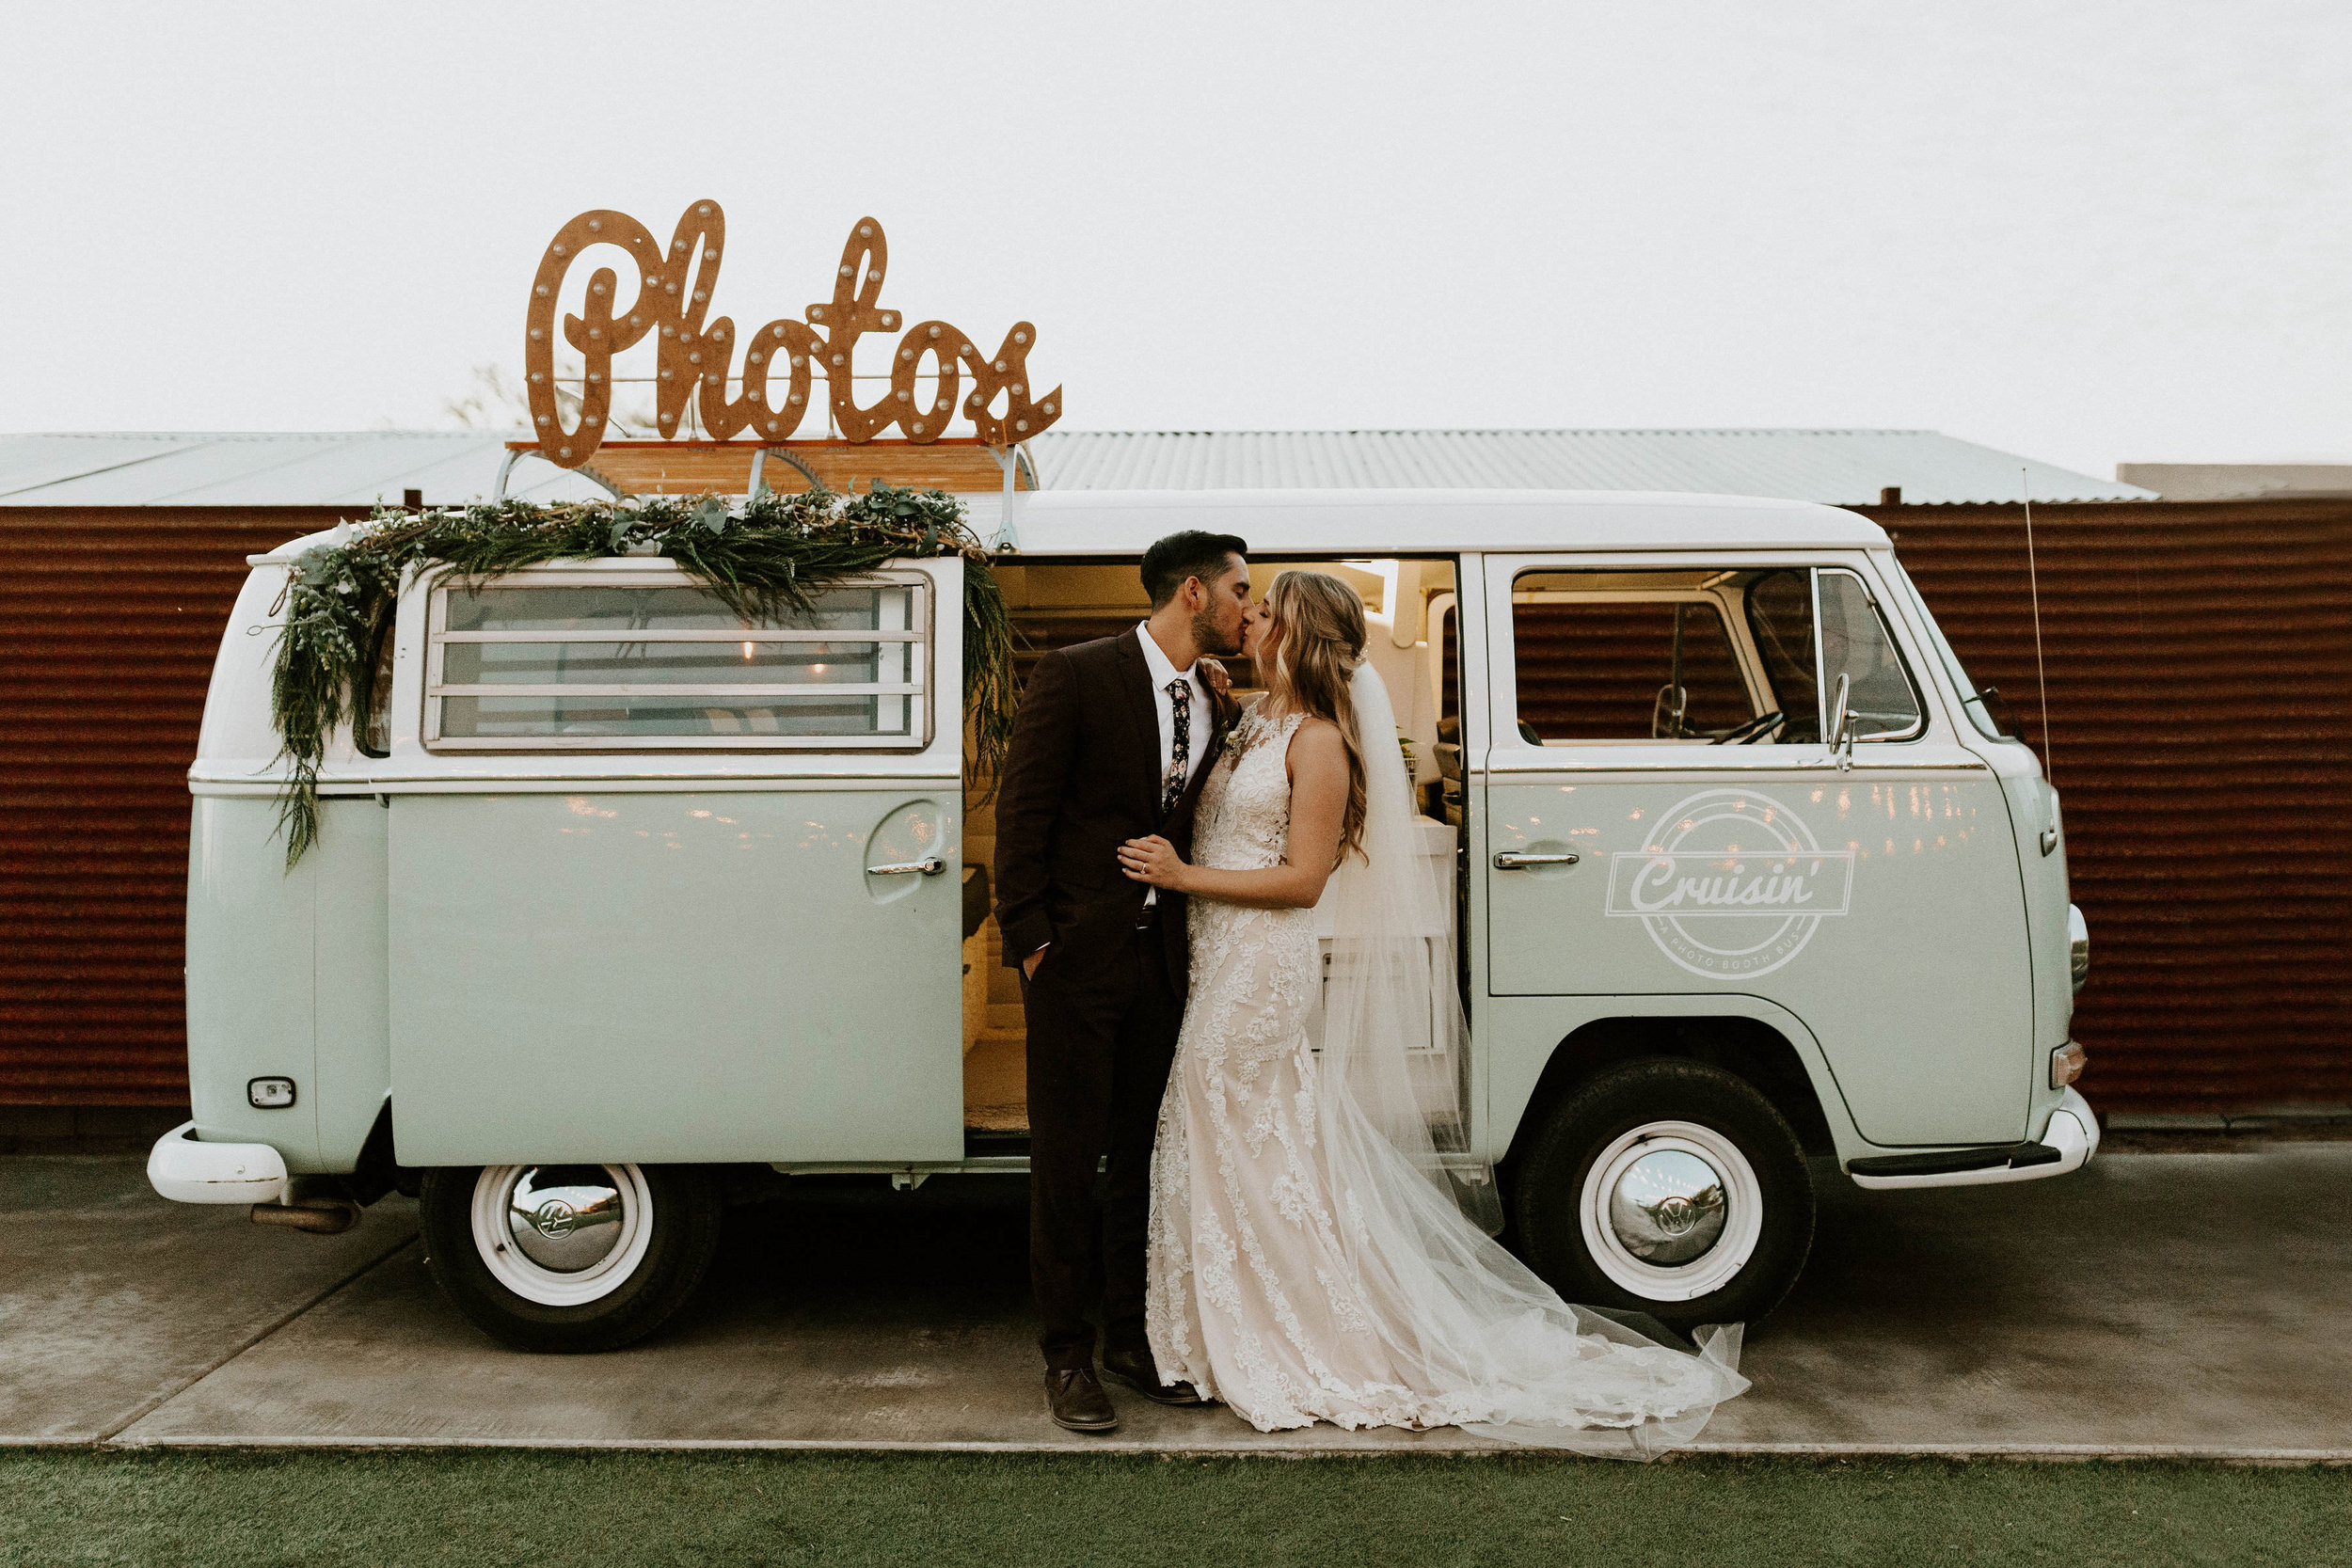 Photo Booth VW Bus at Paseo Wedding Venue